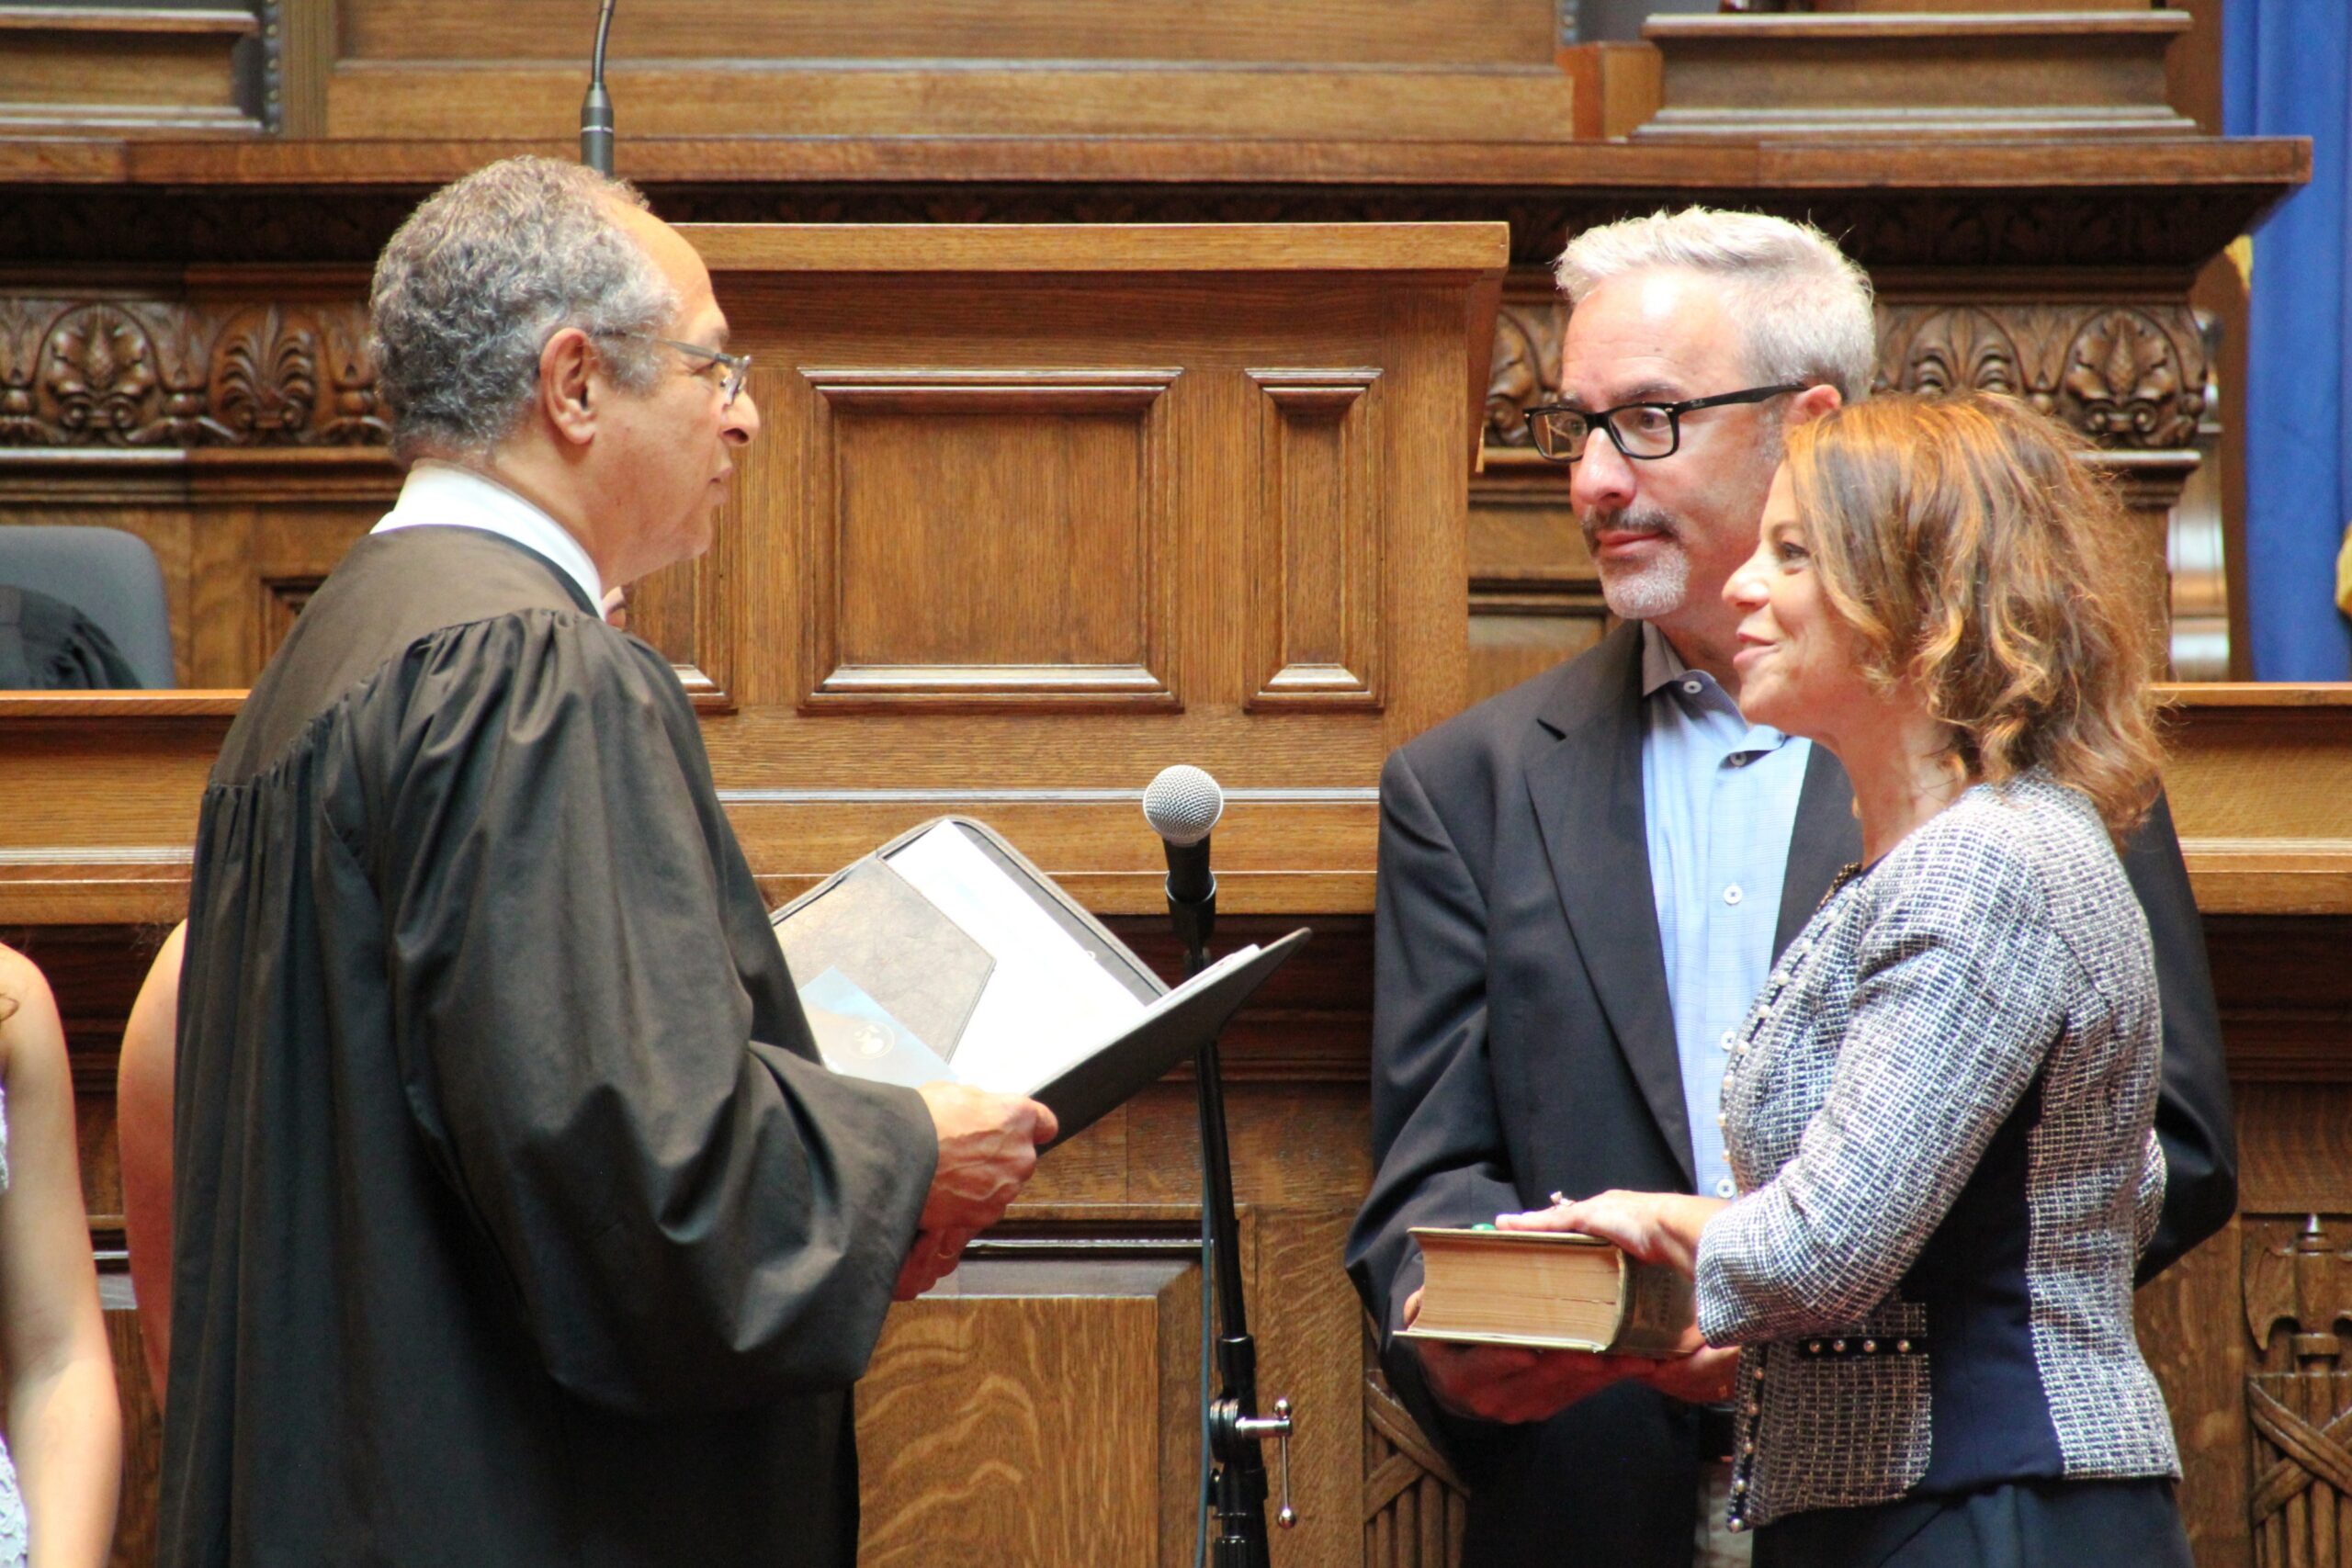 Former state Supreme Court Justice Louis Butler administers the oath of office to new Justice Rebecca Dallet